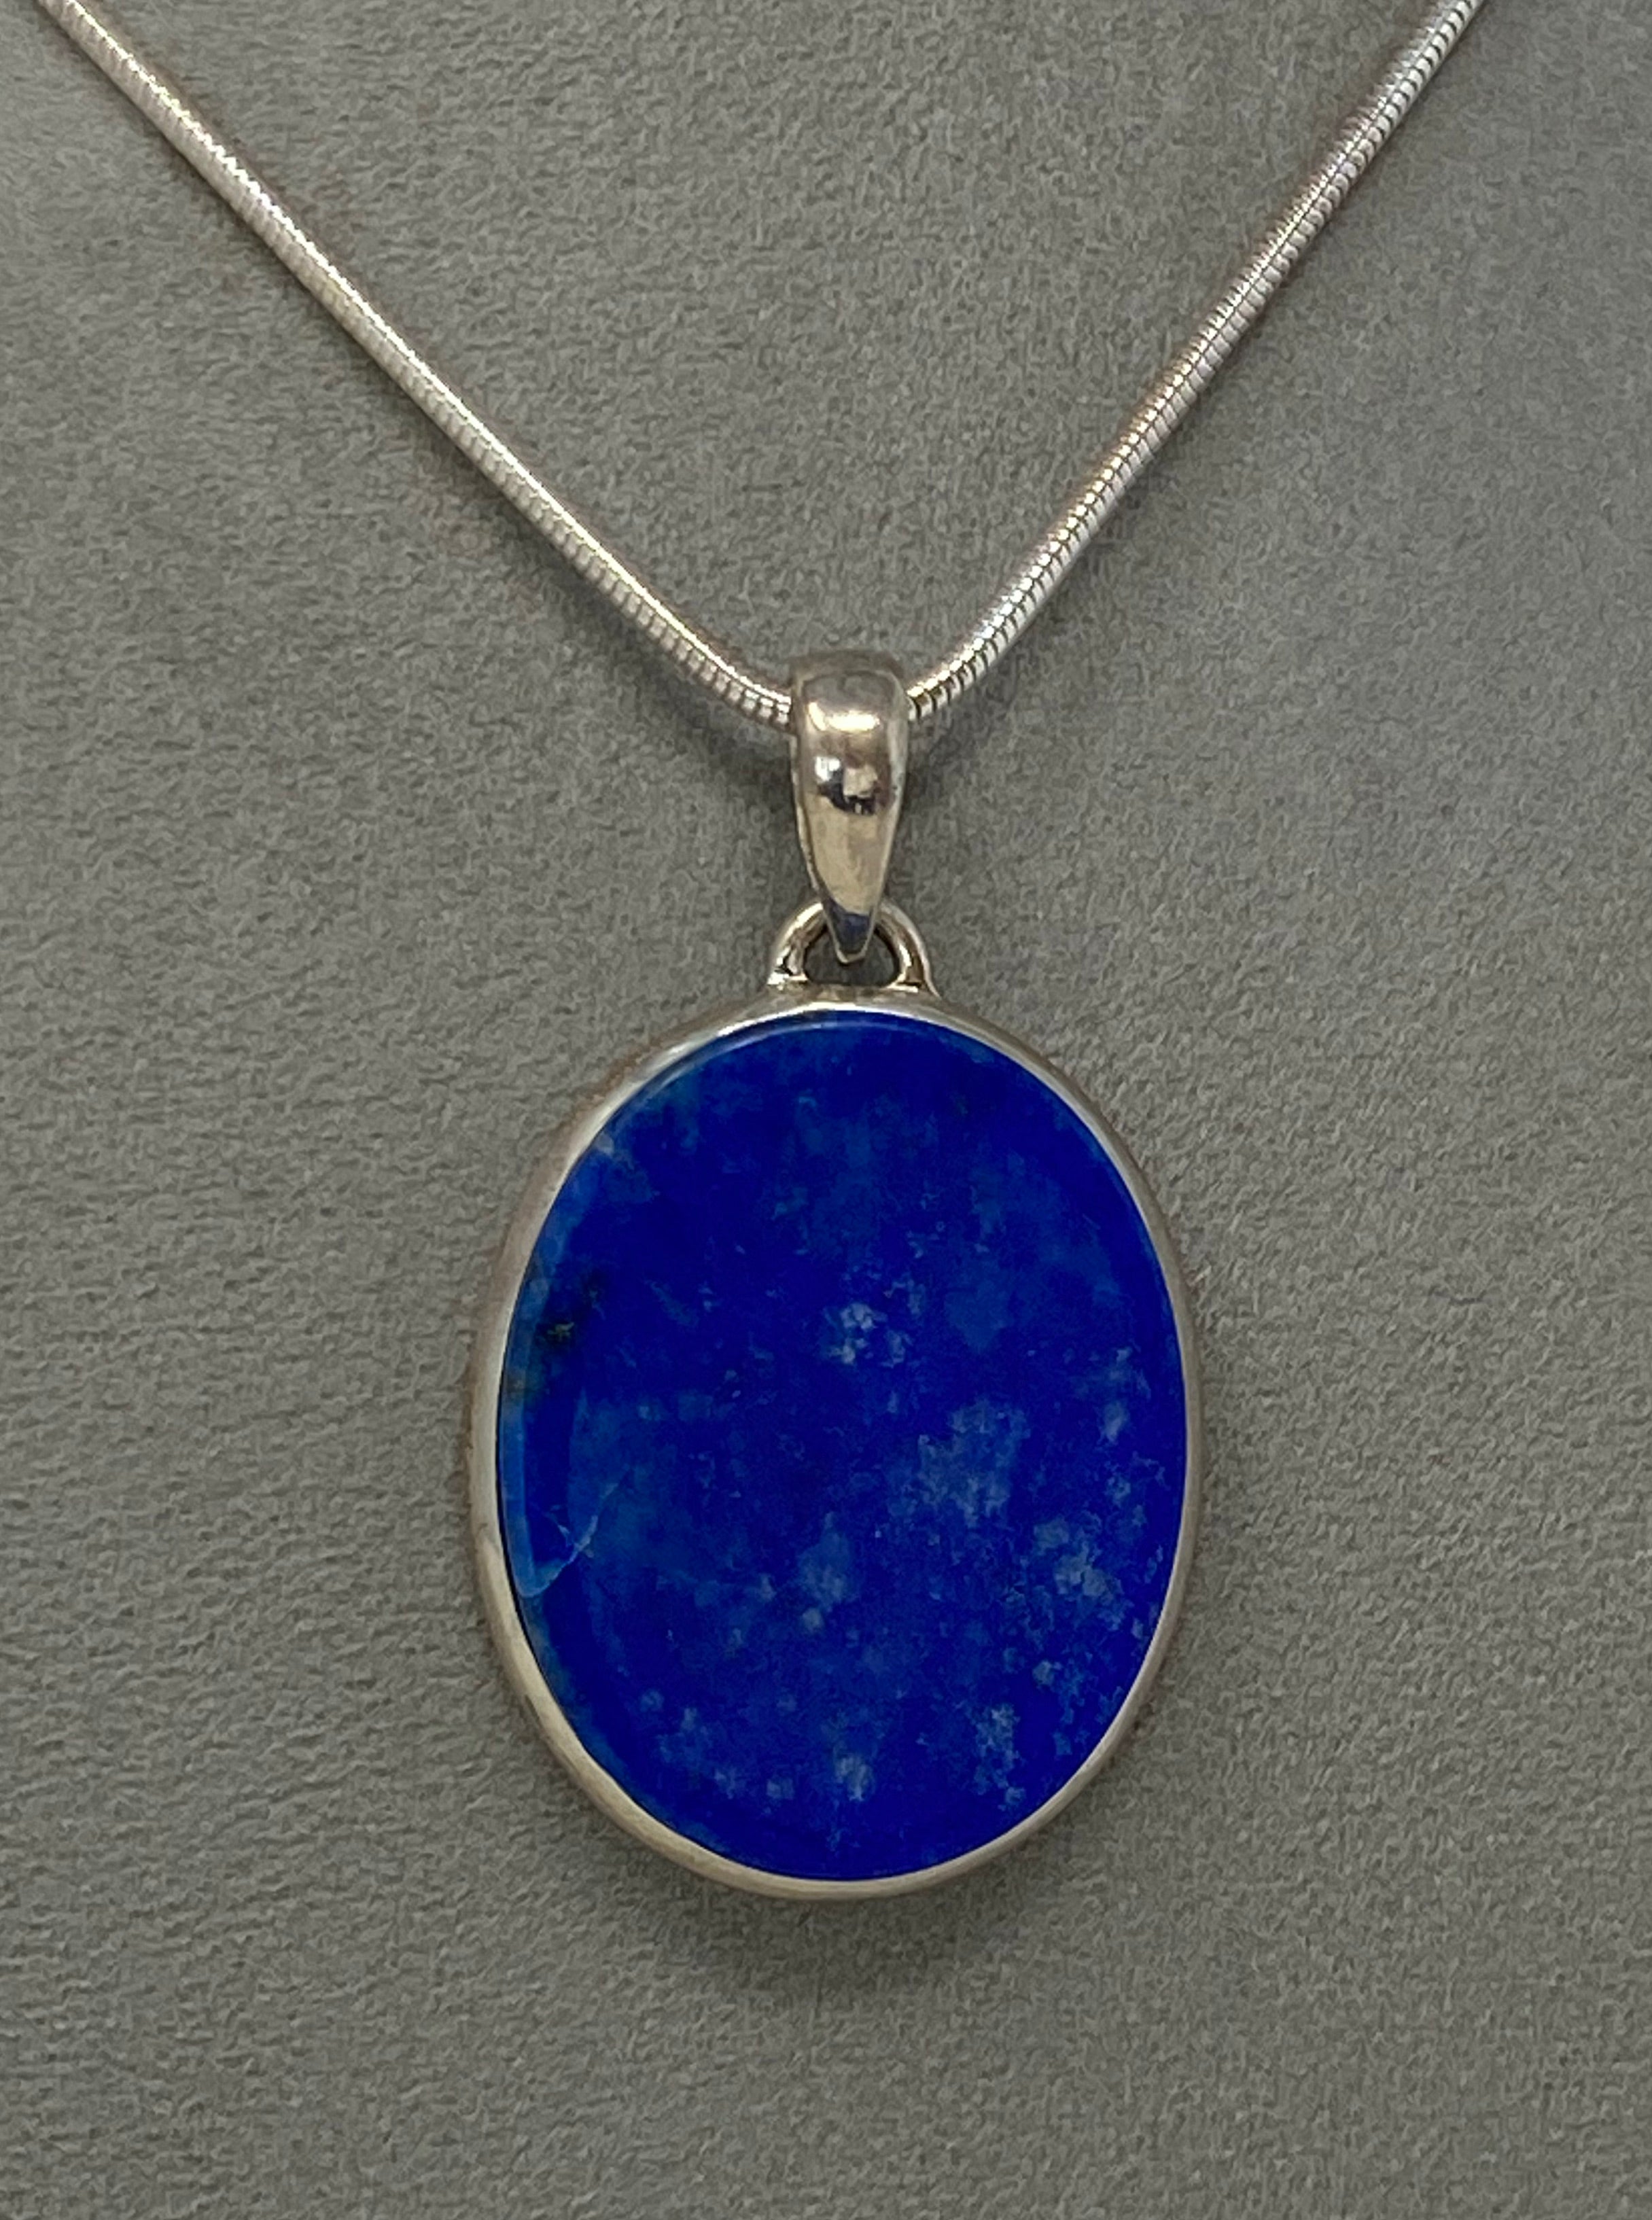 Silver and Large Lapis Pendant on Snake Chain